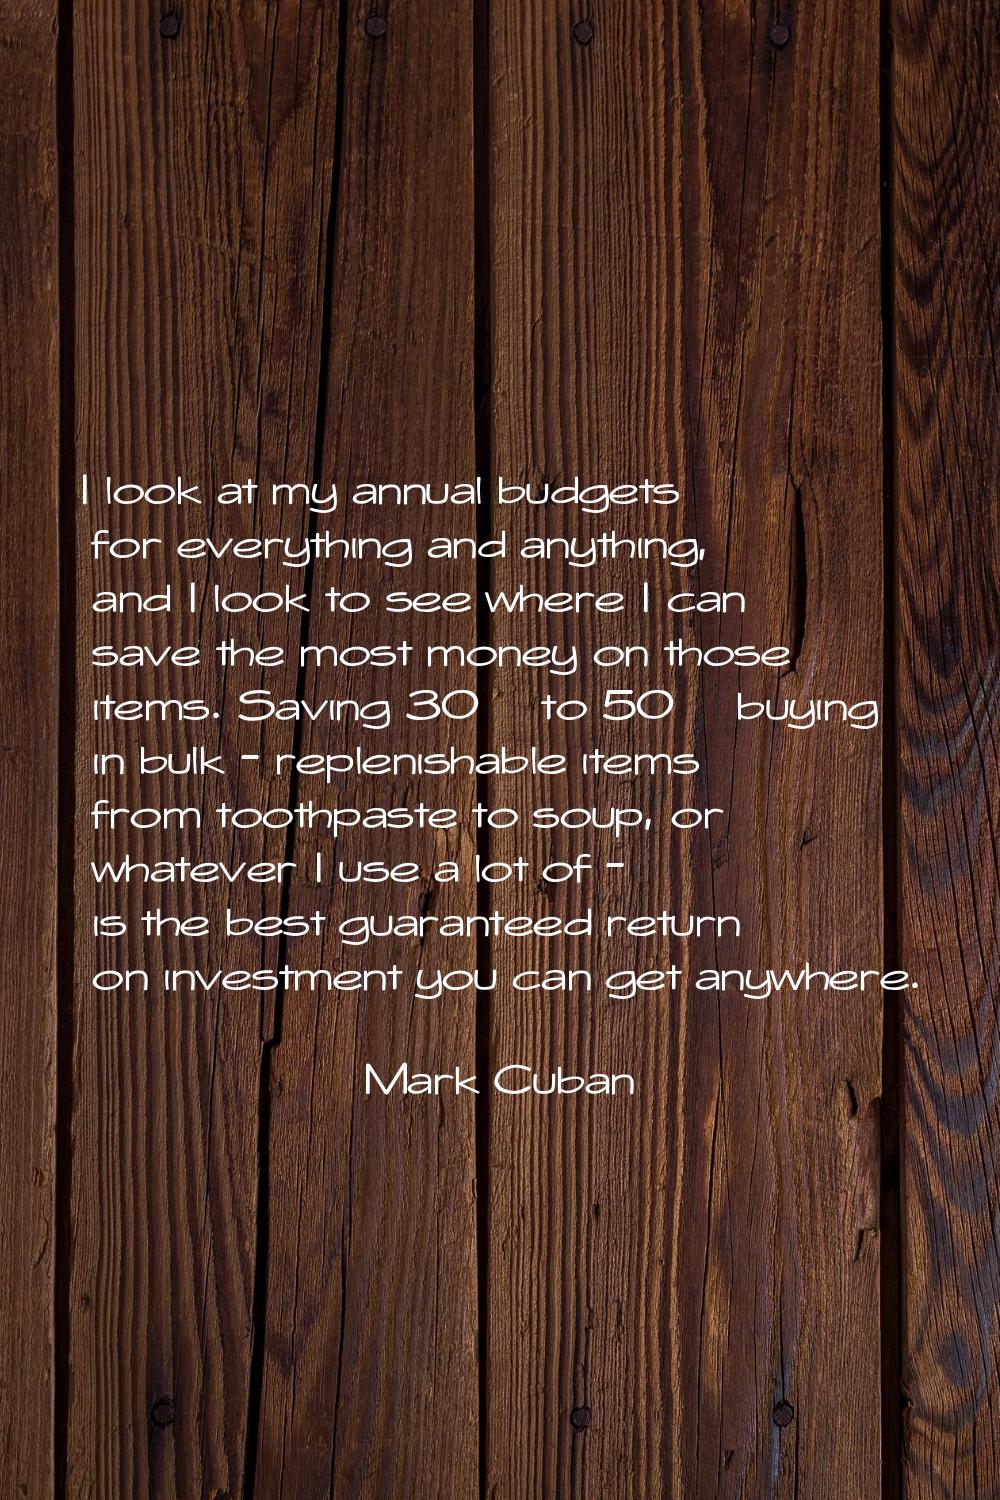 I look at my annual budgets for everything and anything, and I look to see where I can save the mos